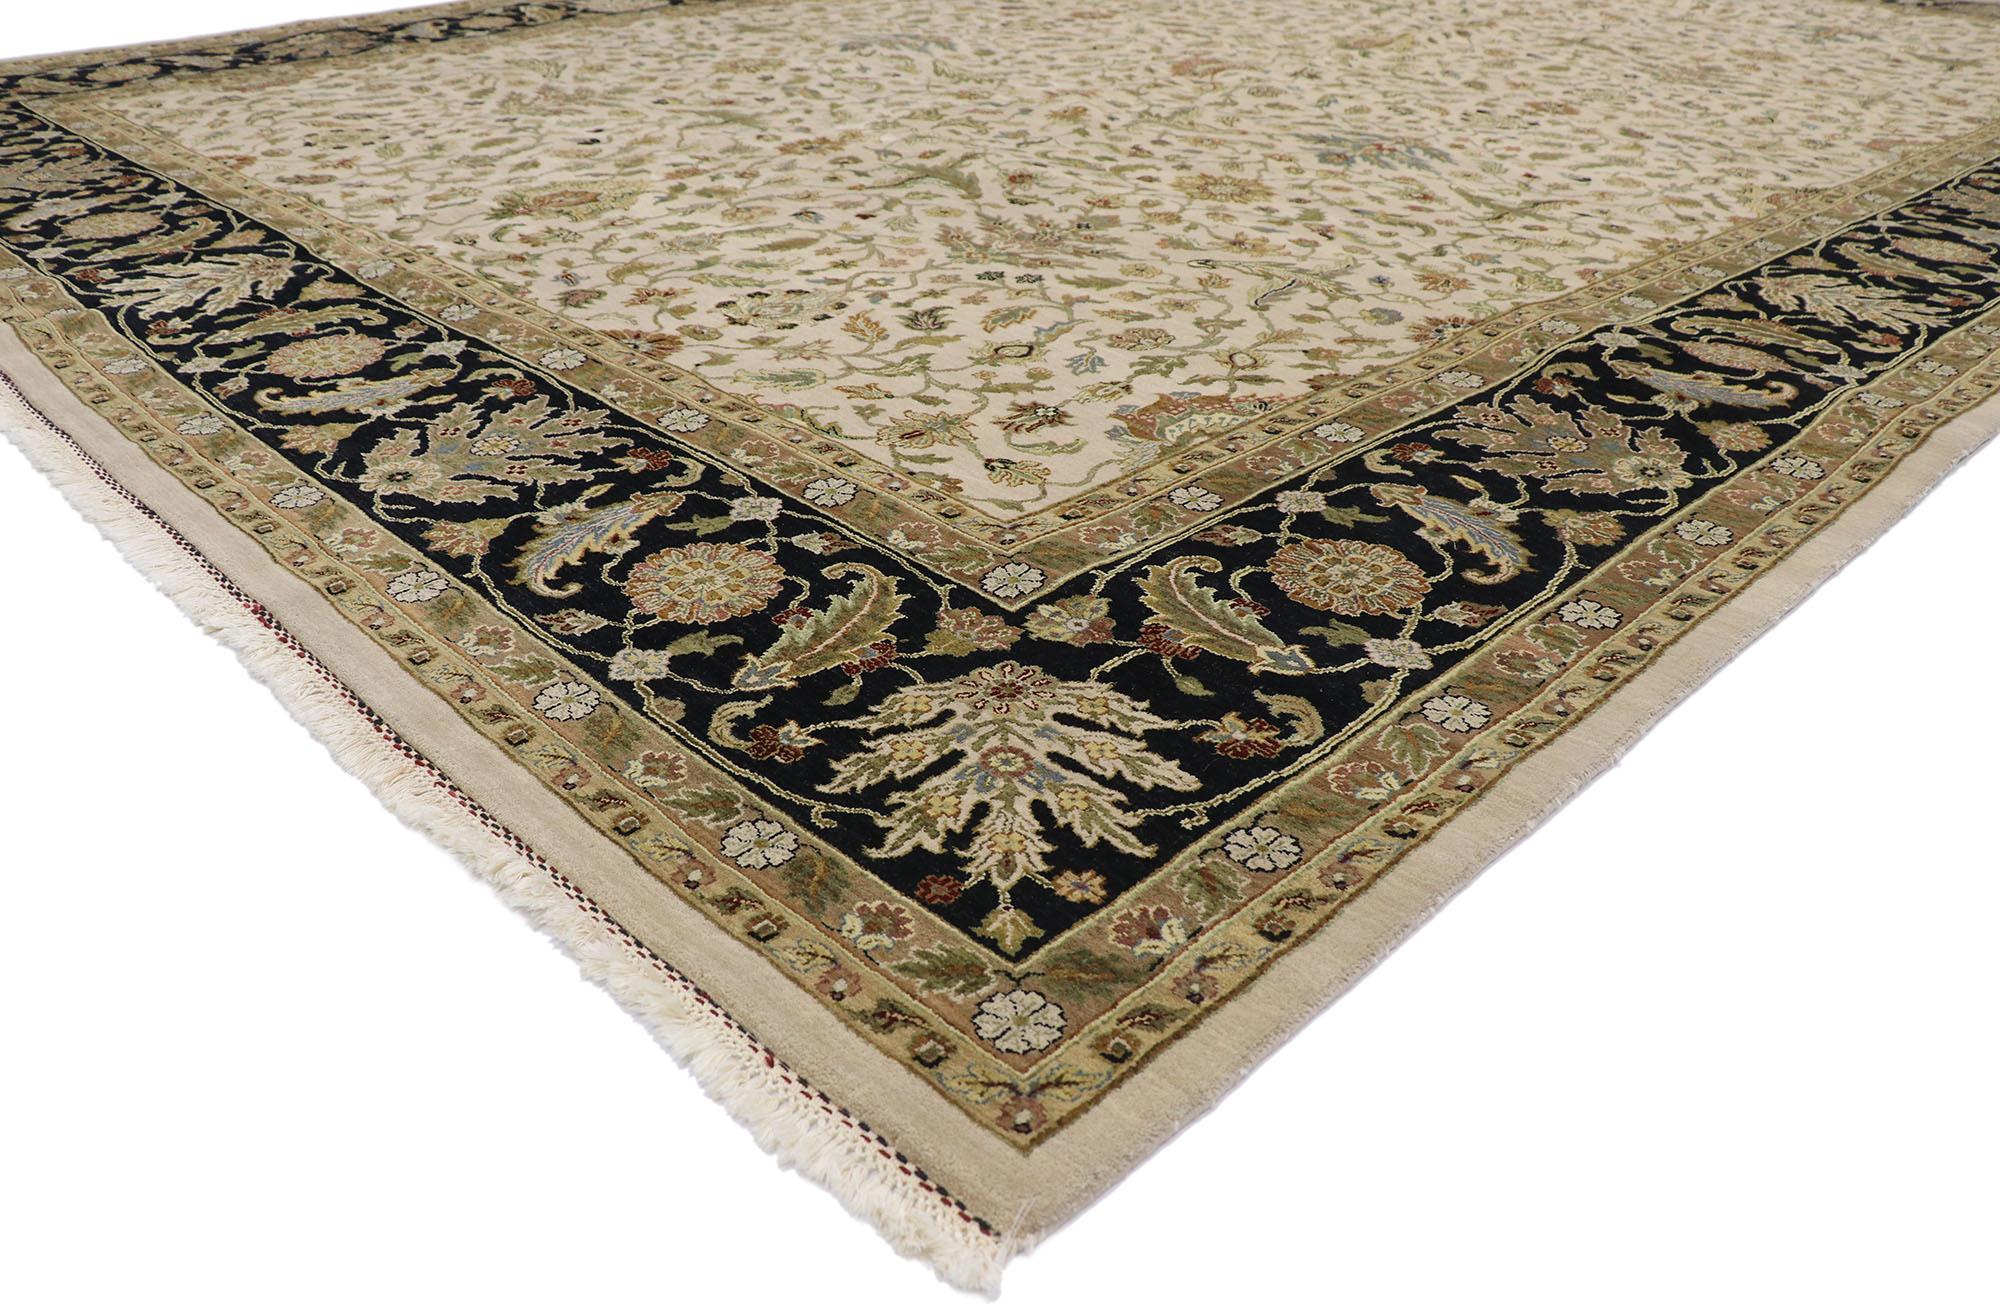 76807, vintage Traditional Indian Palace size rug with Colonial style. This hand knotted wool vintage traditional Indian palace size rug with Colonial style features an all-over botanical lattice composed of a repeating pattern on palmettes, leafy